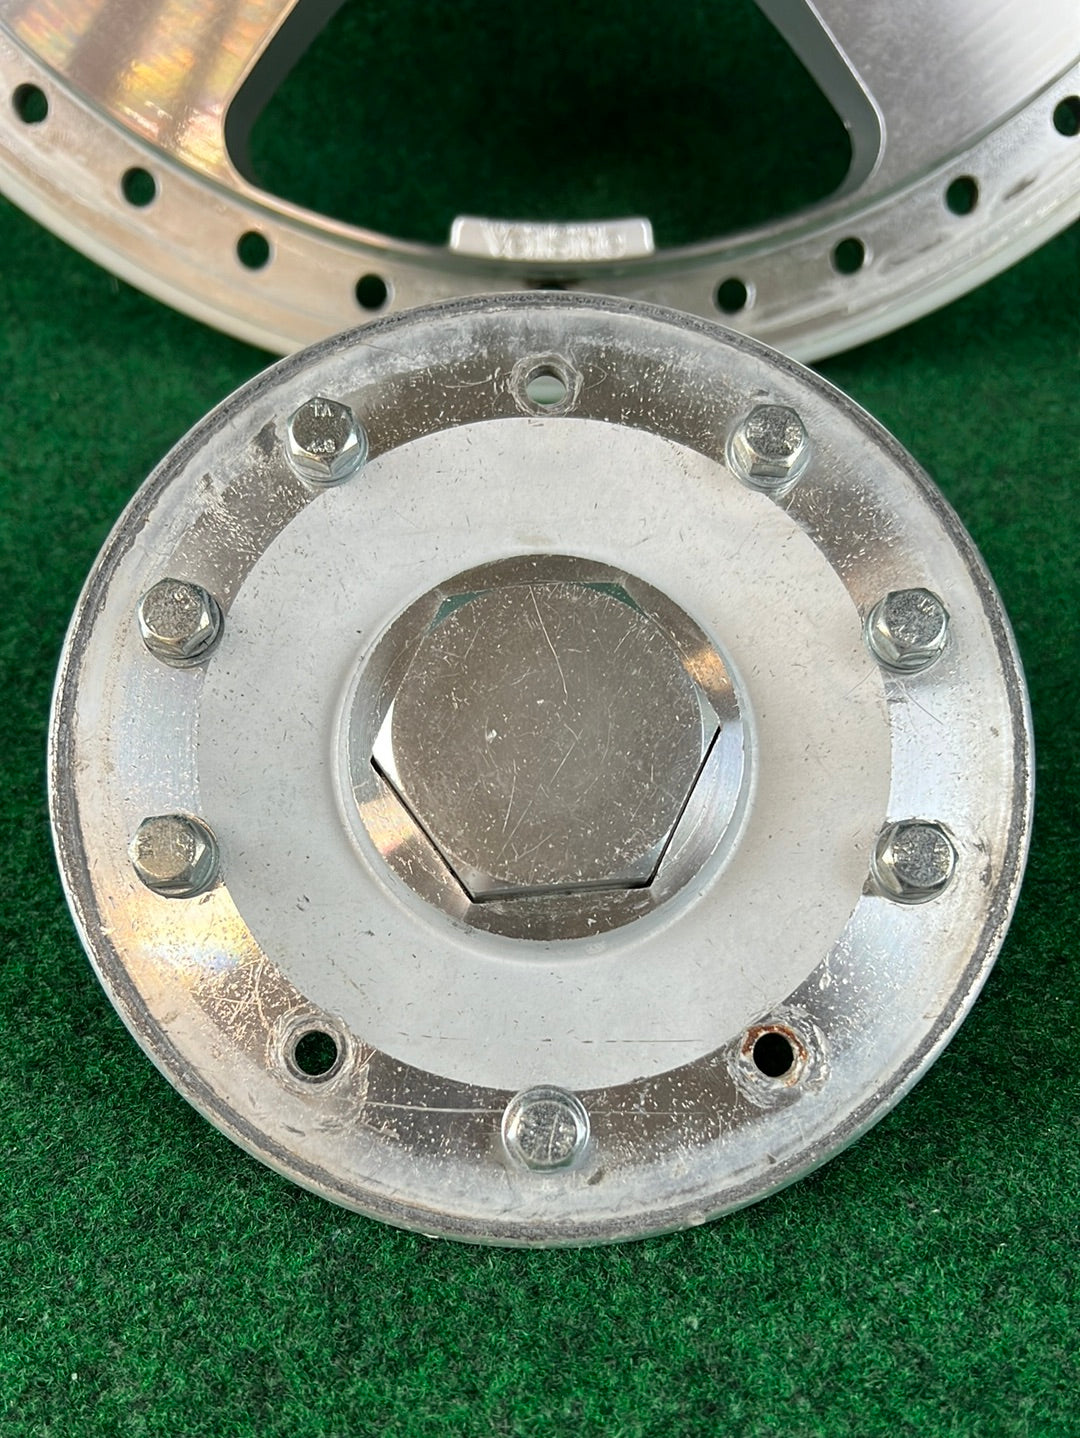 Veilside Andrew - 3 Piece Wheel Face with Center Cap for Wheel